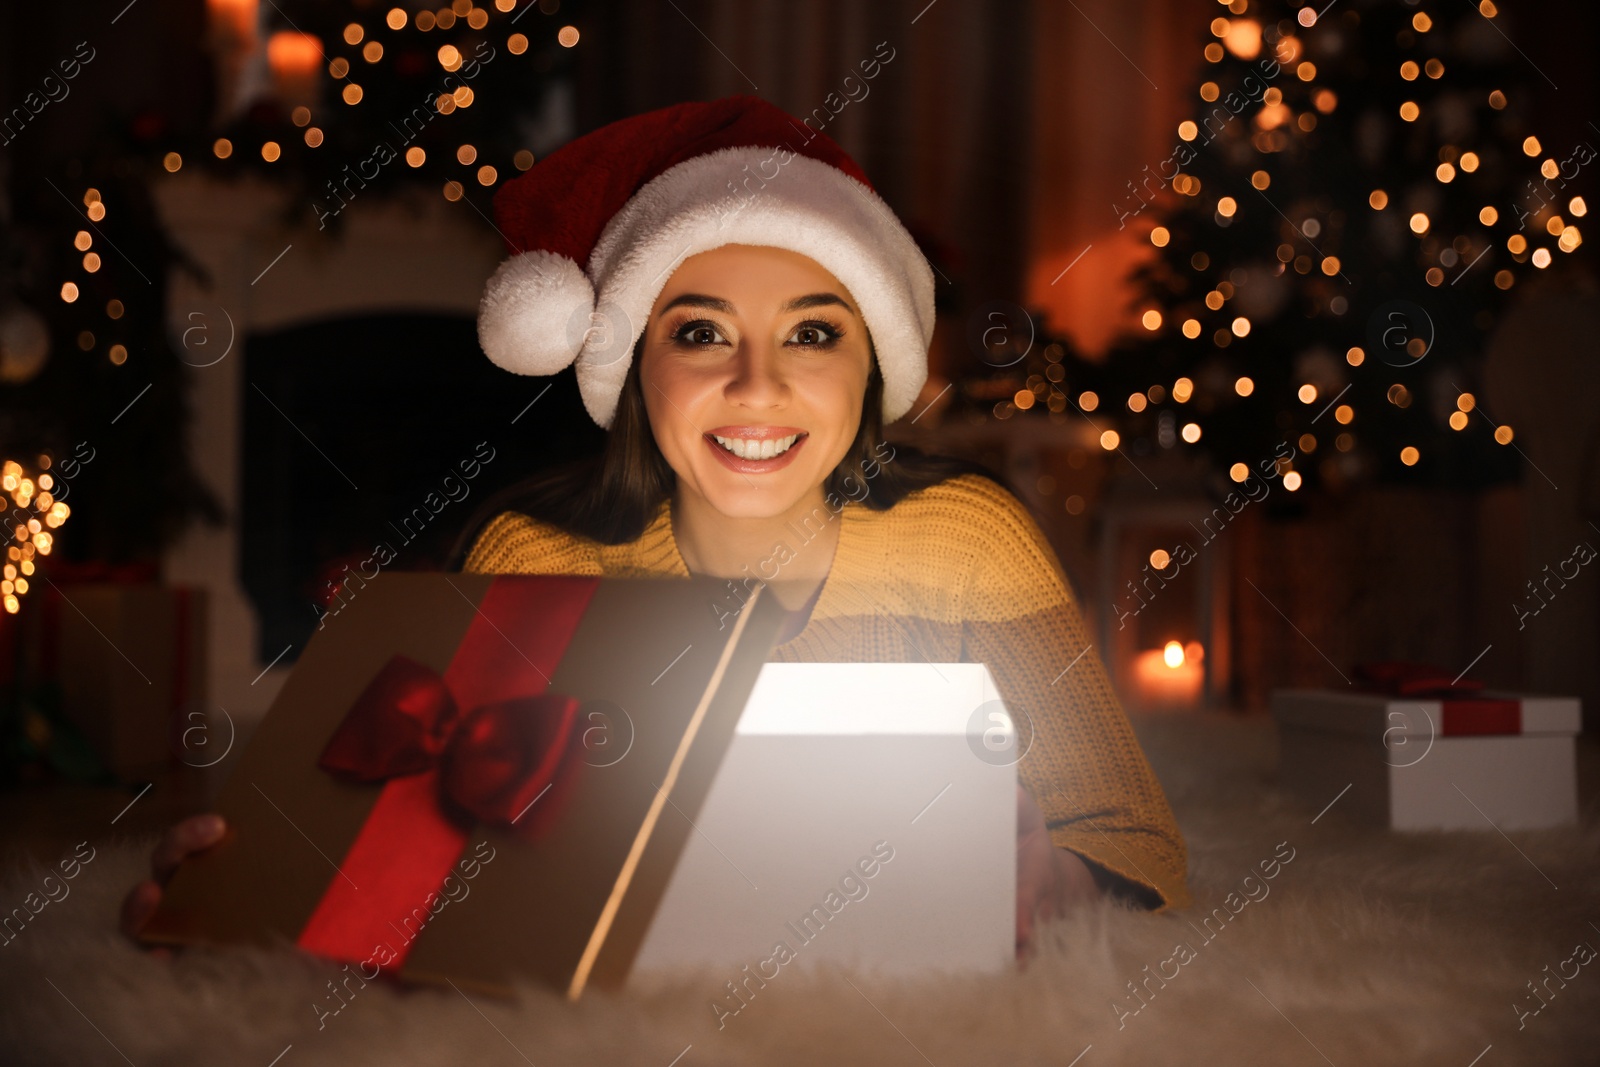 Photo of Young woman wearing Santa hat opening Christmas gift on floor at home